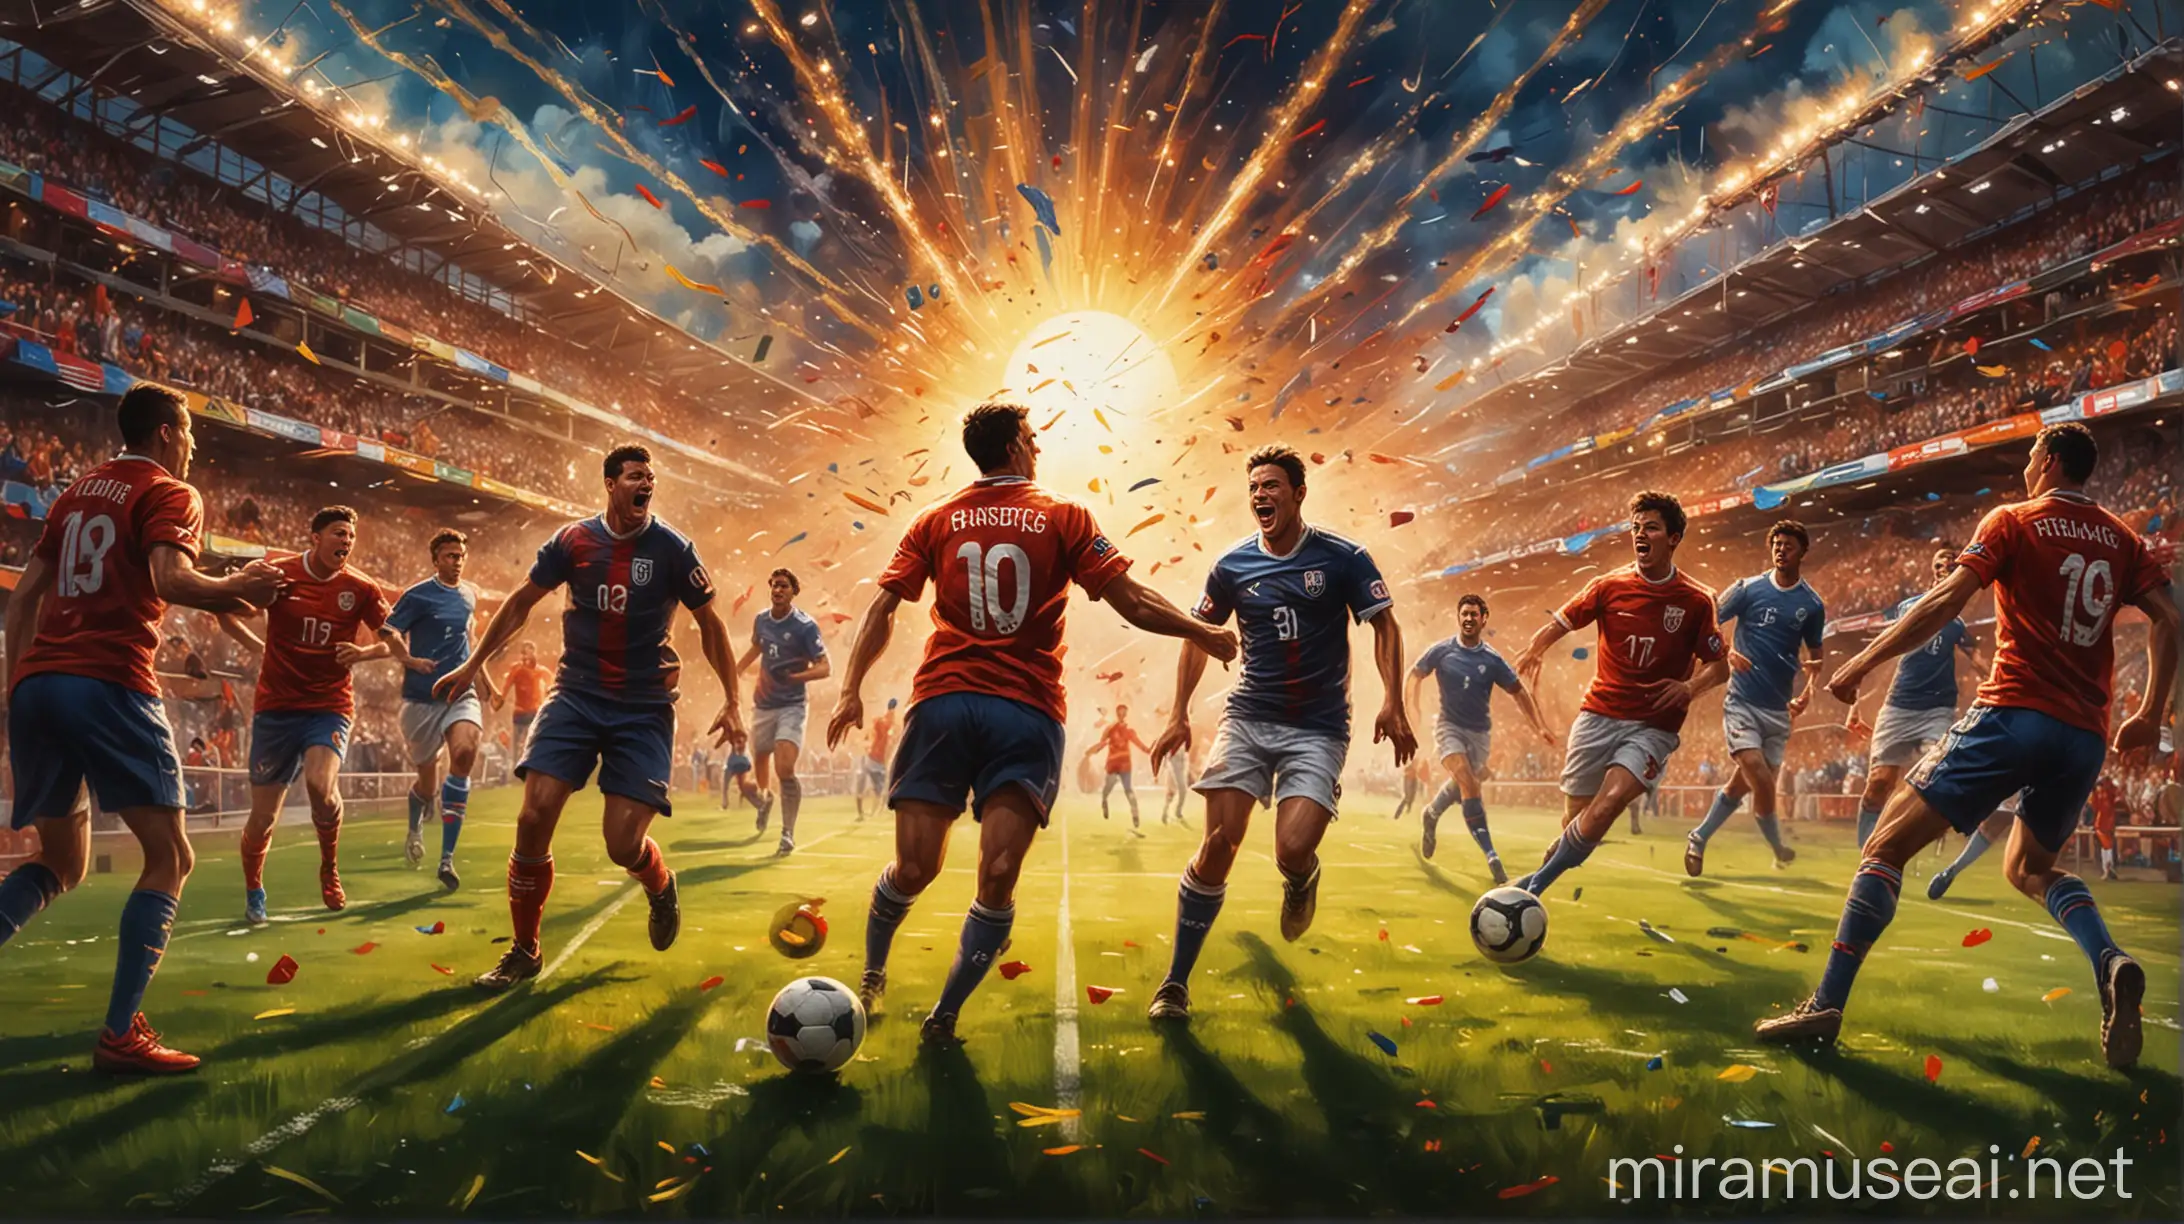 Let's create an Artwork based on the description below

This artwork will be a digital painting, with a colorful and vibrant football field scene. In the foreground, we see a player holding the ball, ready to take a powerful shot. Sunlight shines down from above, creating highlights and shadows on the field.
In the back, there was a group of fans cheering passionately. They carried banners and flags, and their faces were full of excitement and emotion. The atmosphere became vibrant with cheers and immersion in the exciting atmosphere of the match.
In the lower right corner of the painting, there is a symbol of a ball flying in the air, with streaks of light and sparks to represent movement and energy.
The painting is done with strong lines and bright colors, to create a sense of playfulness and excitement. At the same time, details such as streaks, shadows and lights are created to add movement and depth to the painting.
This artwork will be a symbol of the enthusiasm and excitement of the sport, conveying the emotions and energy of the song through images.